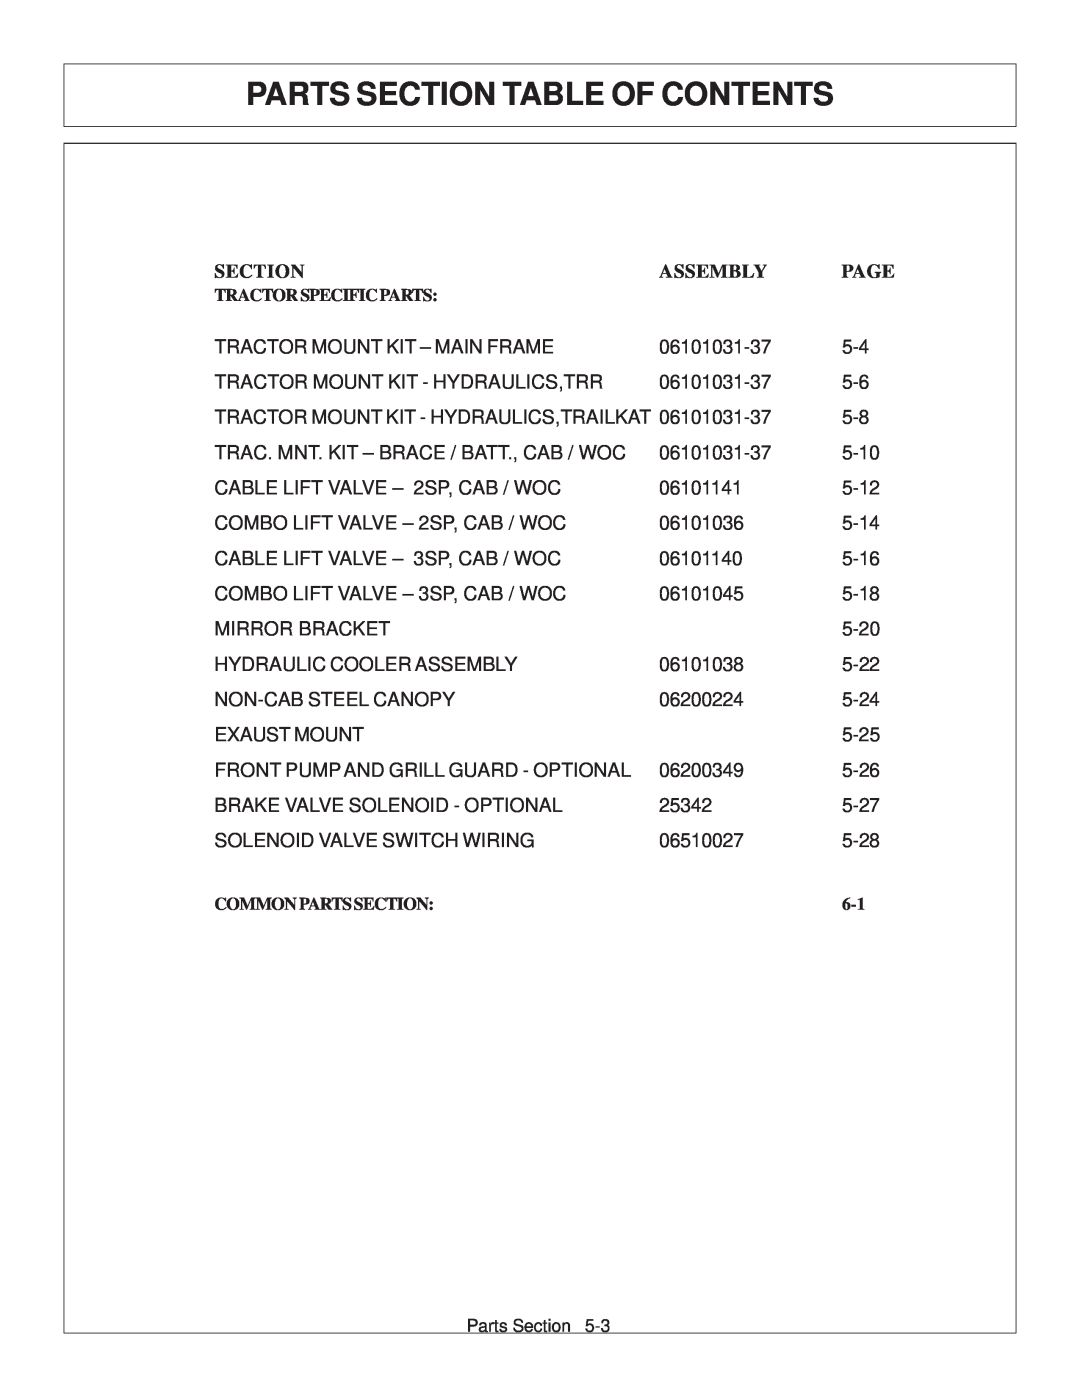 Tiger Products Co., Ltd 6020009 manual Parts Section Table Of Contents, Assembly 